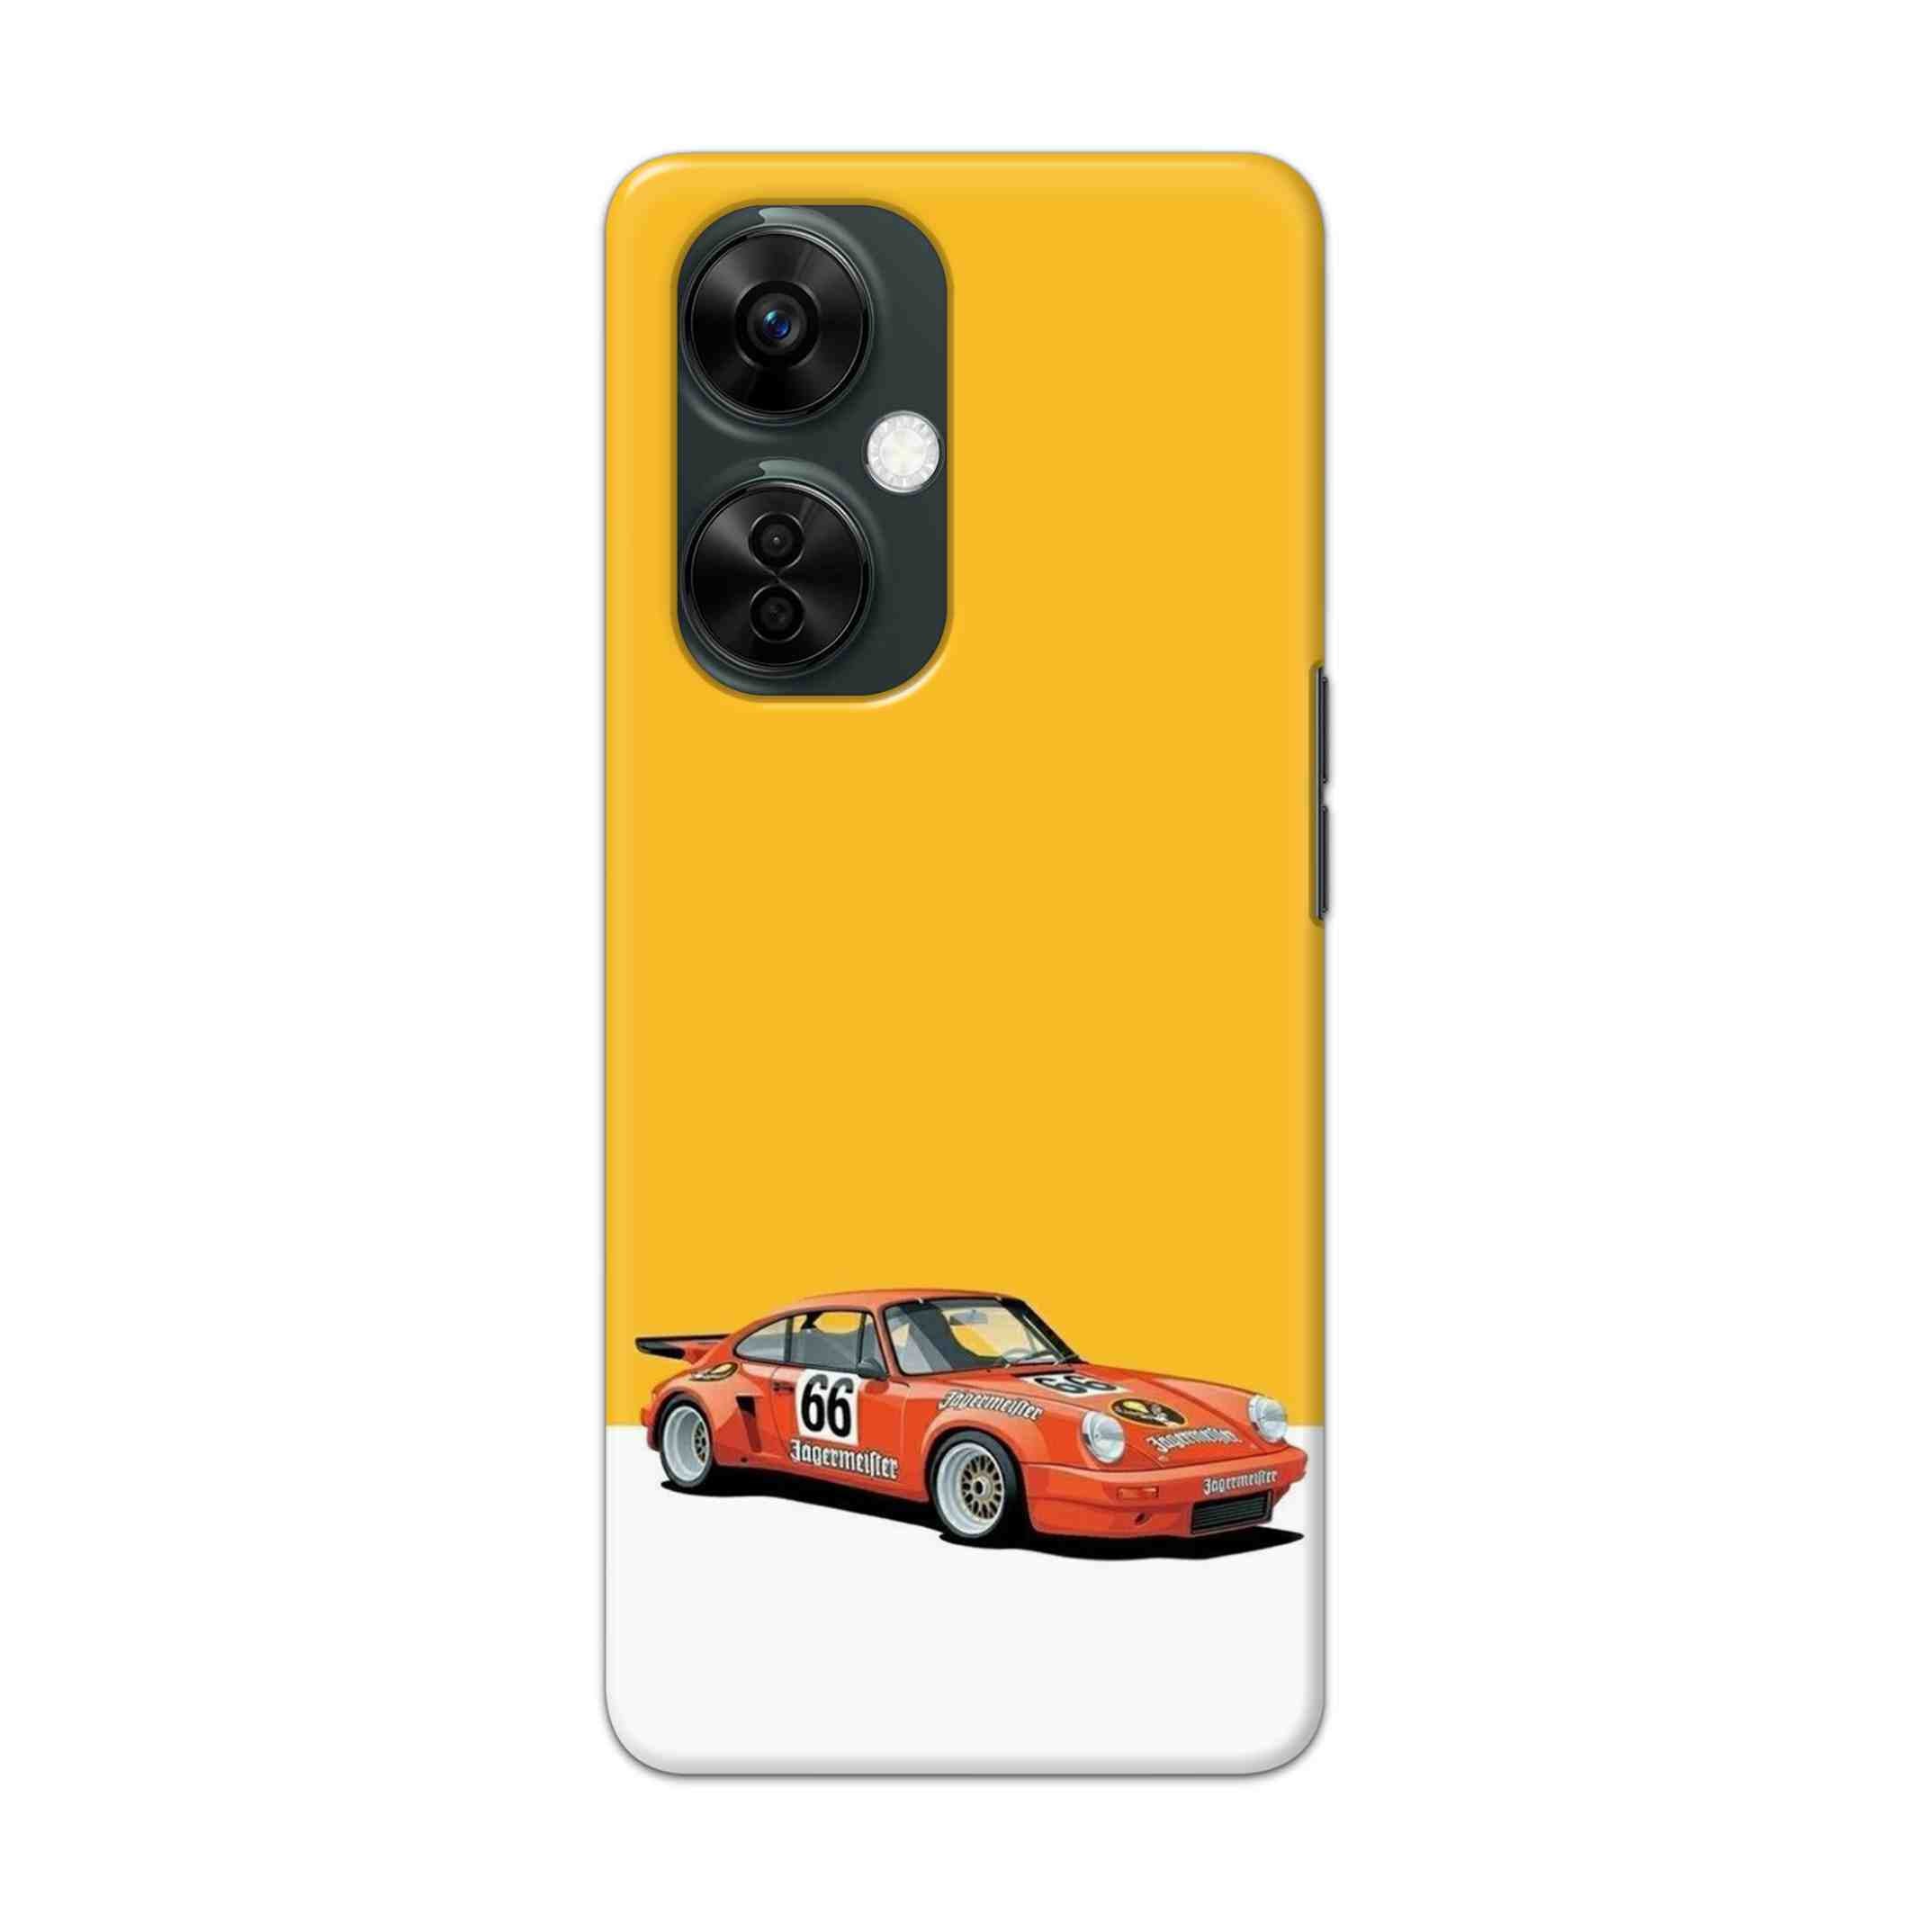 Buy Porche Hard Back Mobile Phone Case Cover For Oneplus Nord CE 3 Lite Online